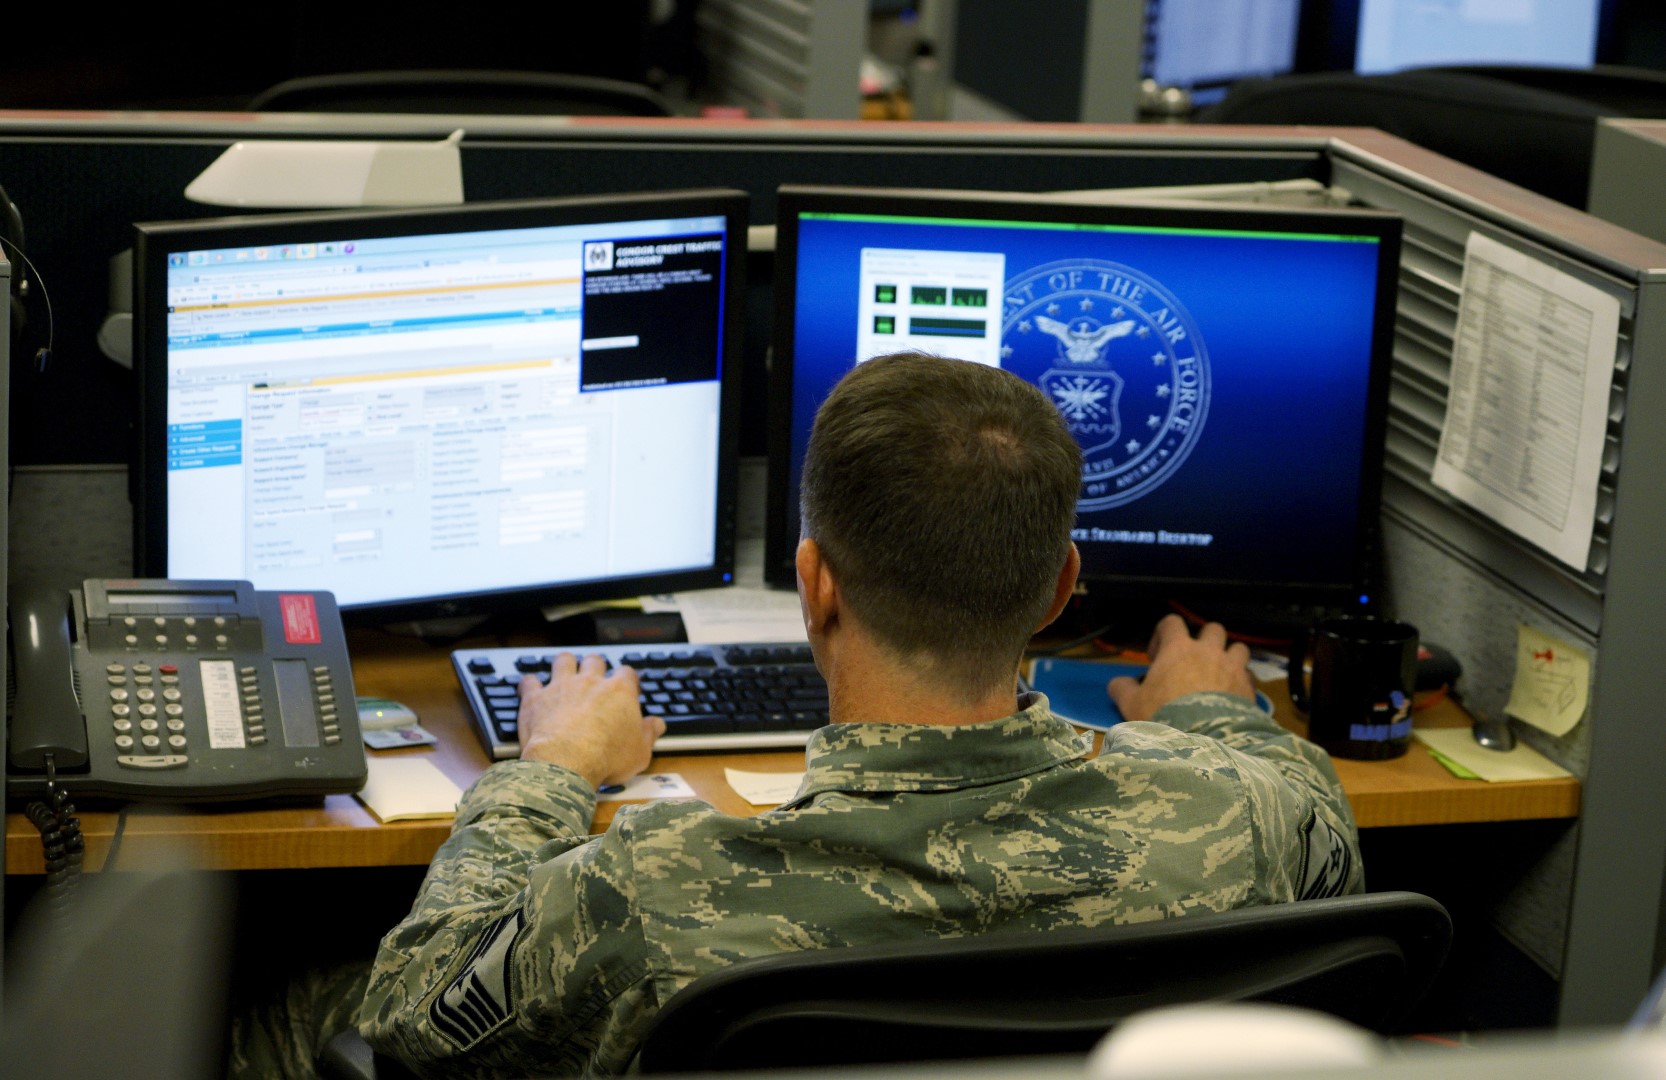 A U.S. Air Force airman works at the 561st Network Operations Squadron (NOS) at Petersen Air Force Base in Colorado Springs, Colorado July 20, 2015.  The 561st NOS executes defensive cyber operations in response to U.S. Cyber Command orders and intelligence based threats.    REUTERS/Rick Wilking - GF10000165291